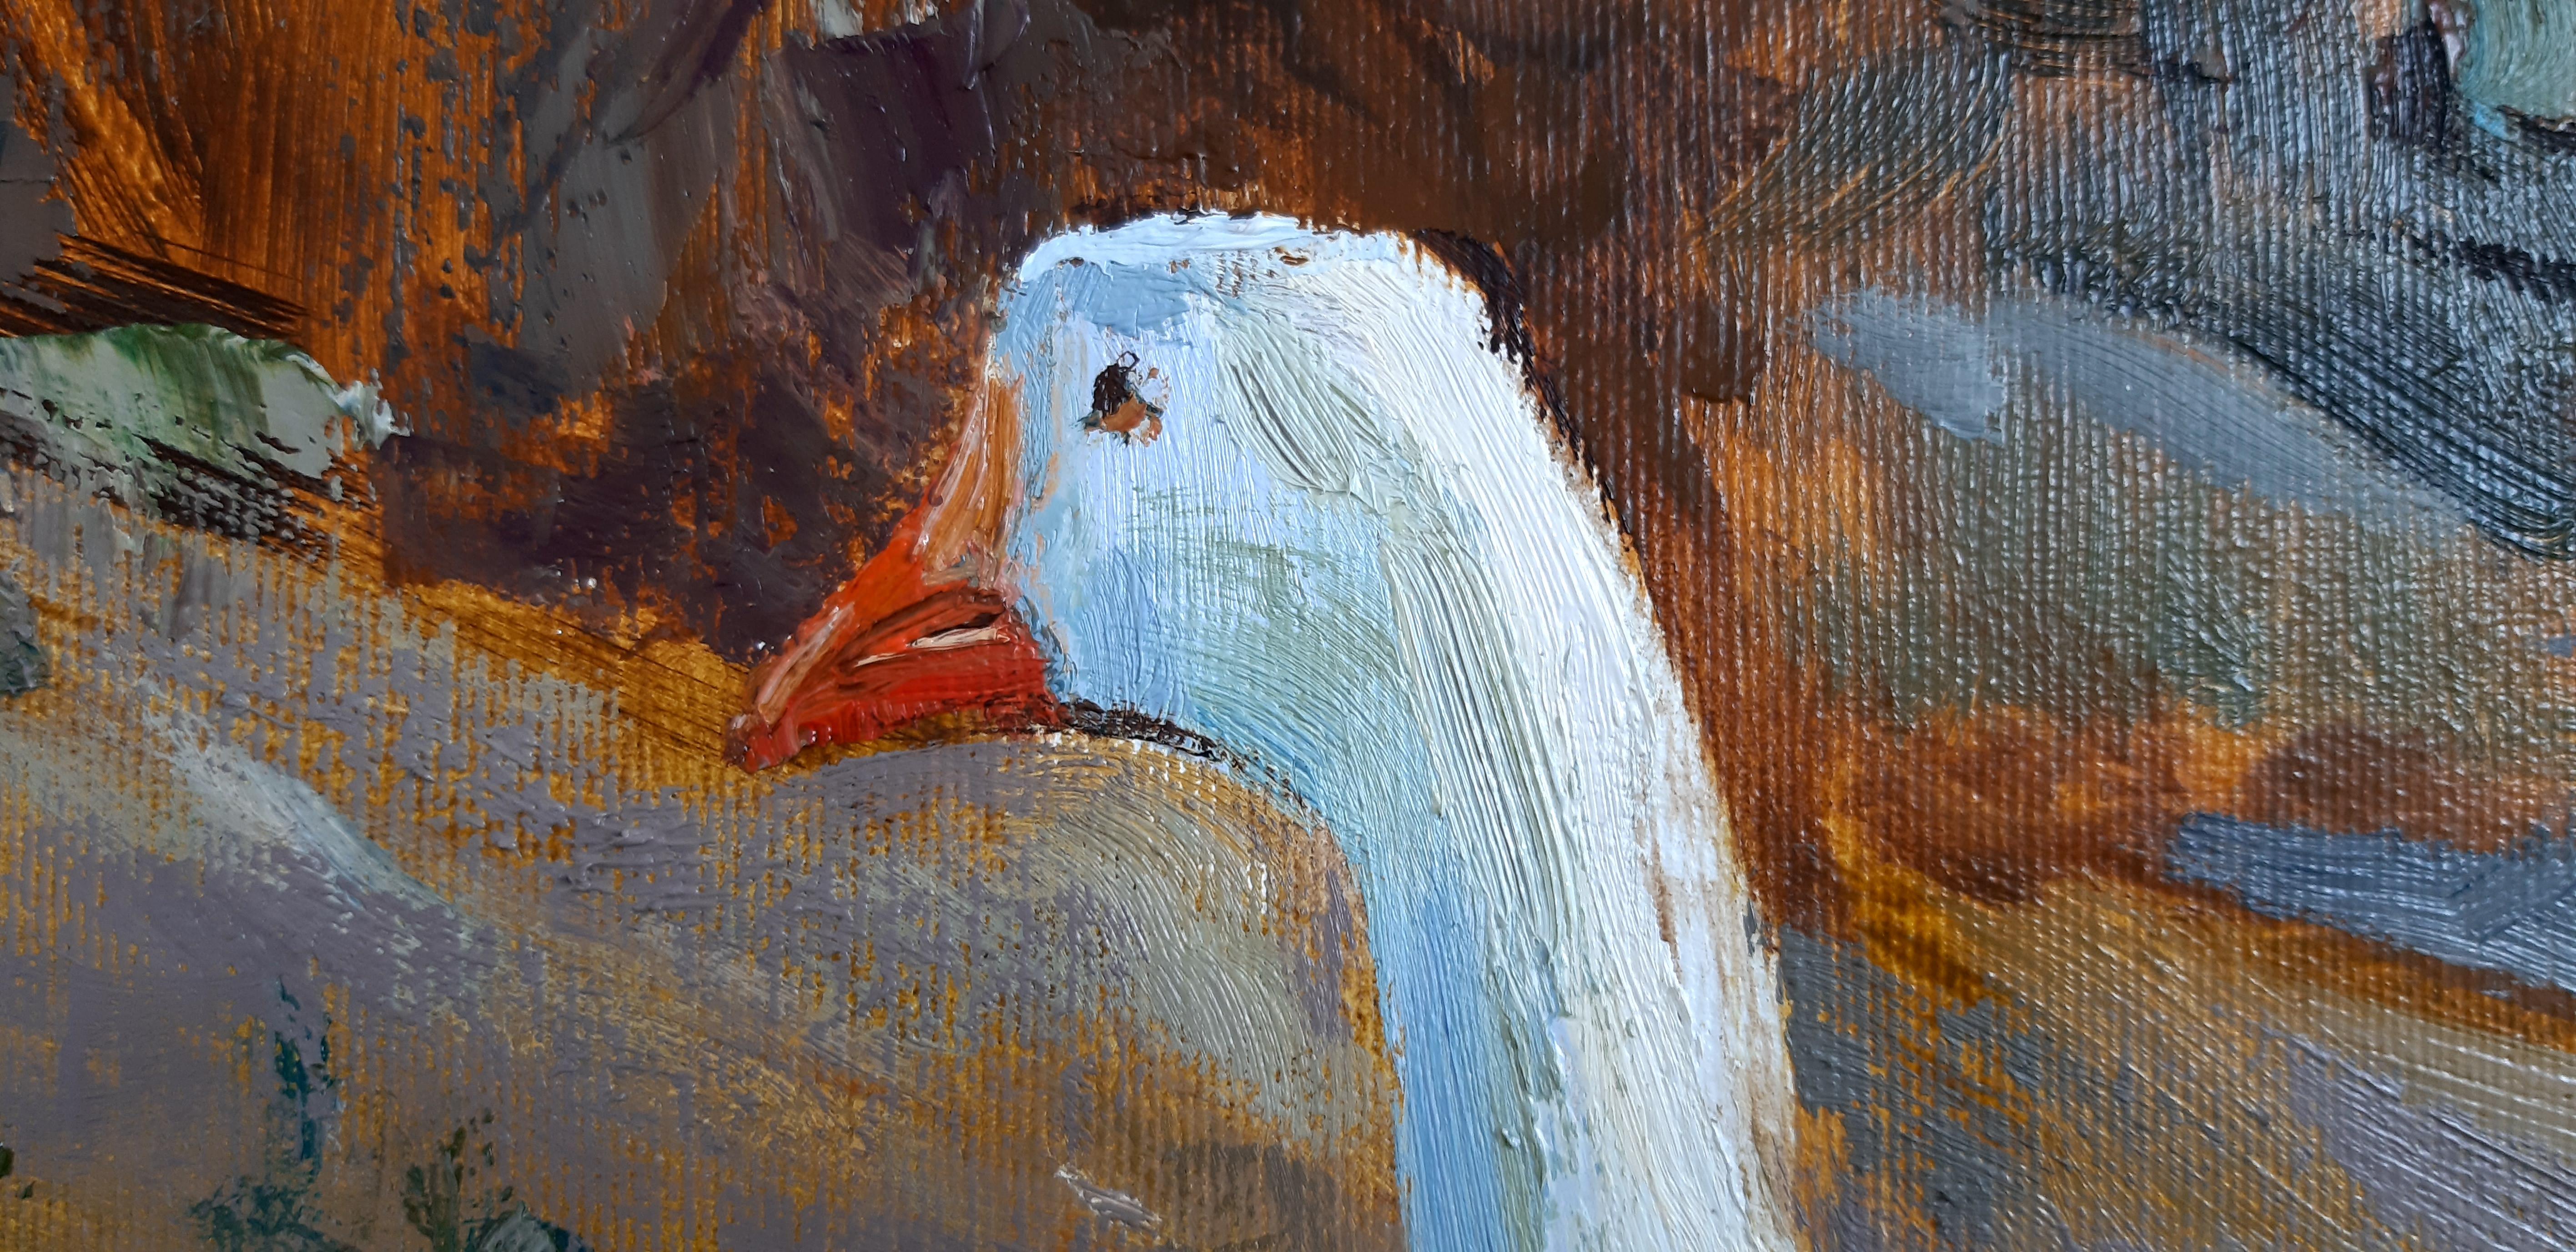 Geese -  Landscape Figurative Painting Colors Blue White Orange Brown Pale - Gray Landscape Painting by Alina Khrapchynska